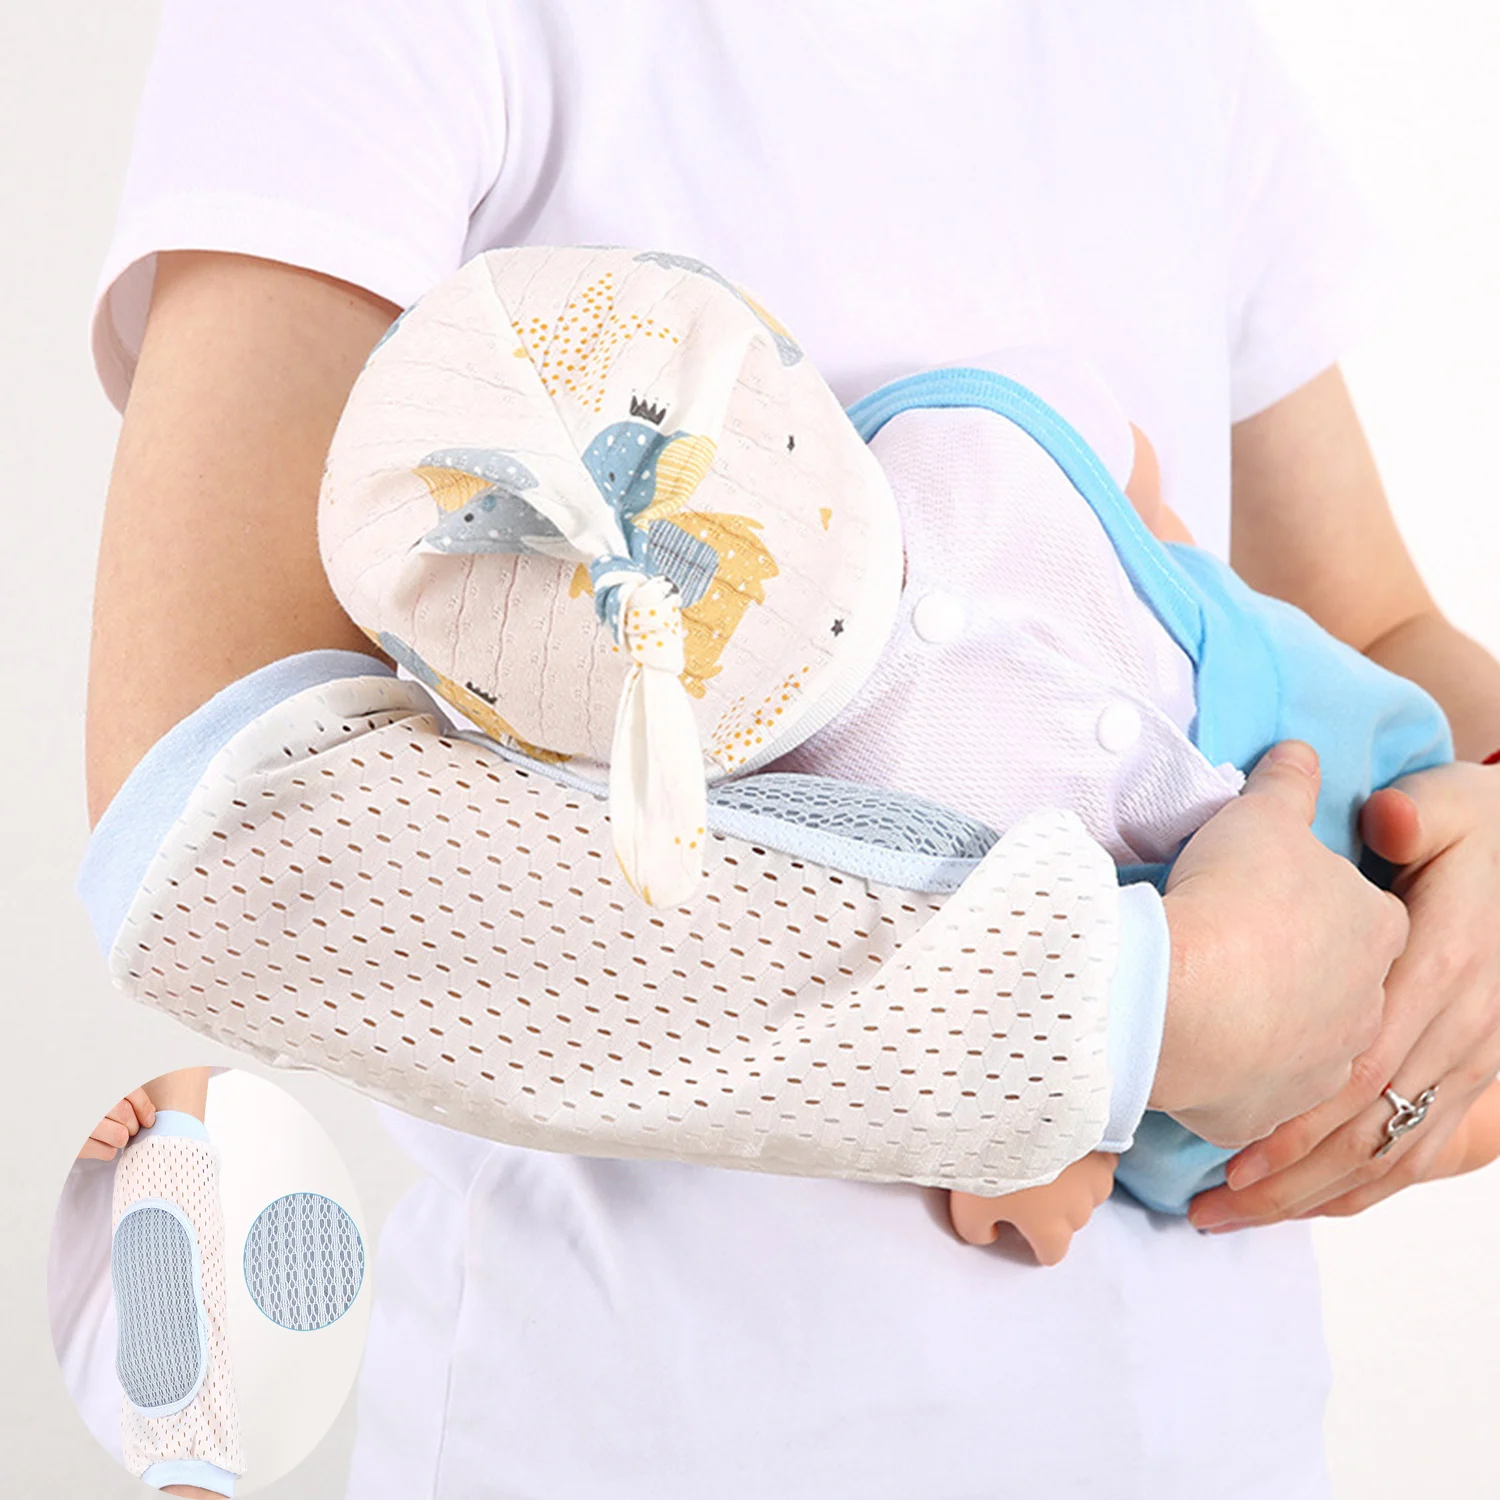 

New Baby Pillow Summer Breastfeeding Pillow Ice Sleeve Pillow Holding Baby Arm Cover Breathable Cushion Pad Feeding Sleeve